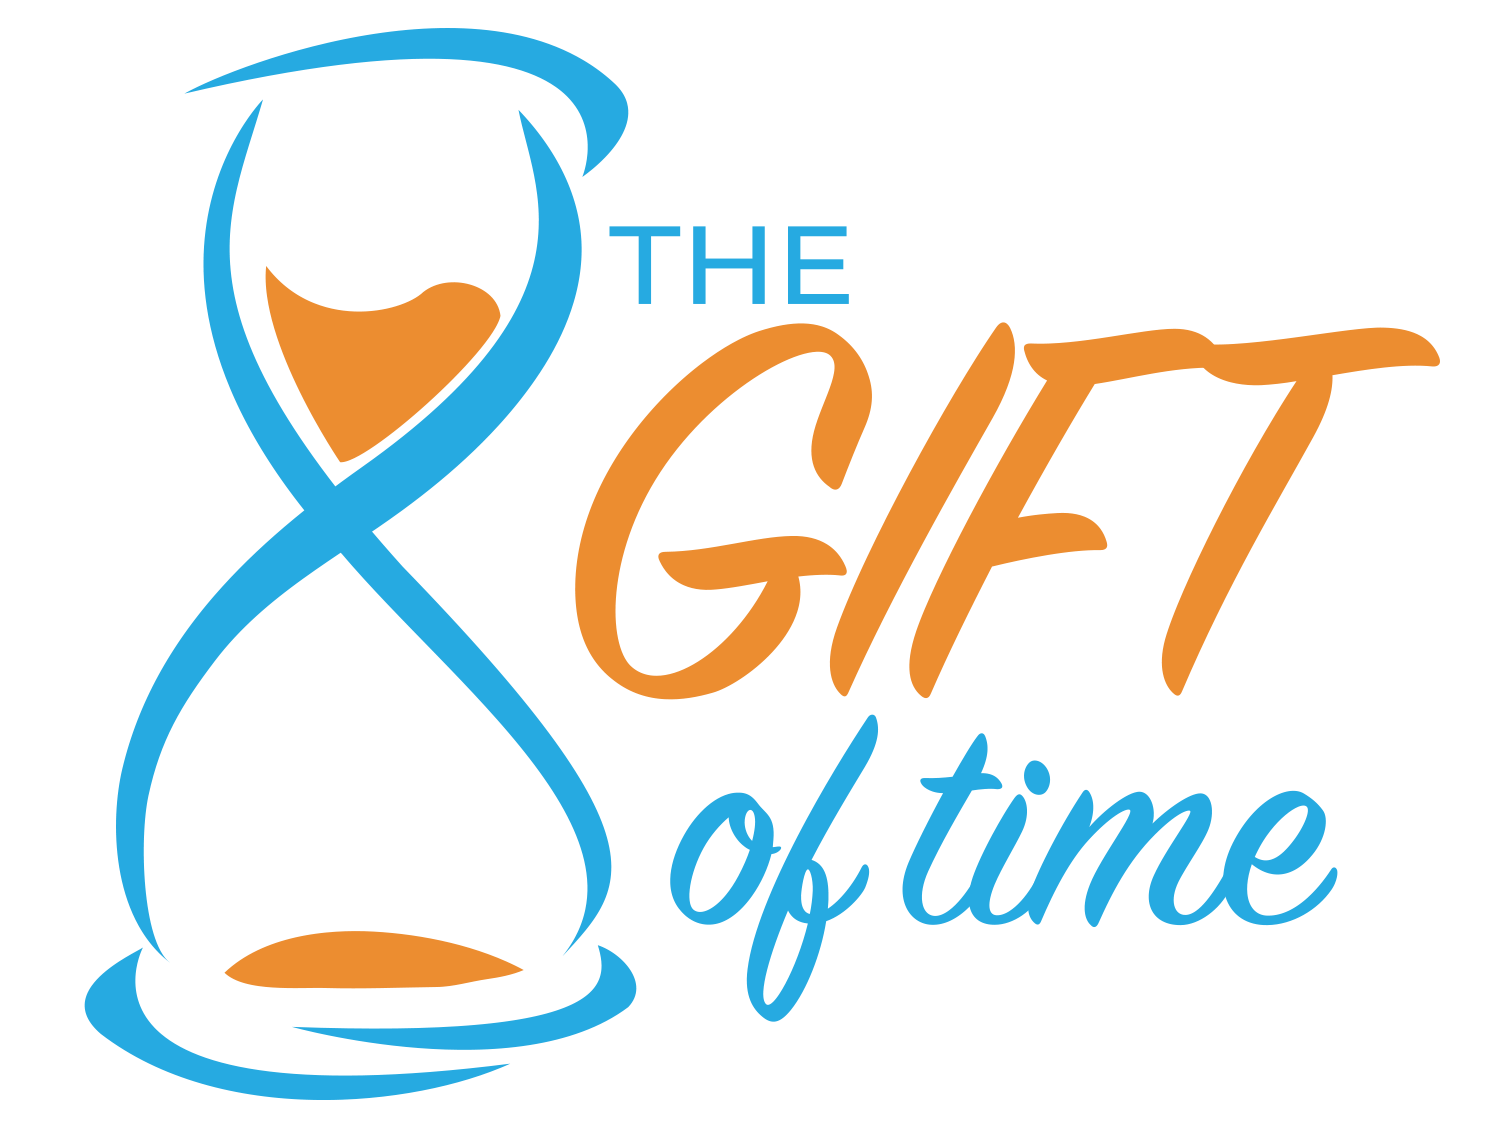 Time Logo - GIST Awareness Day Gift of Time logo download - The Life Raft Group